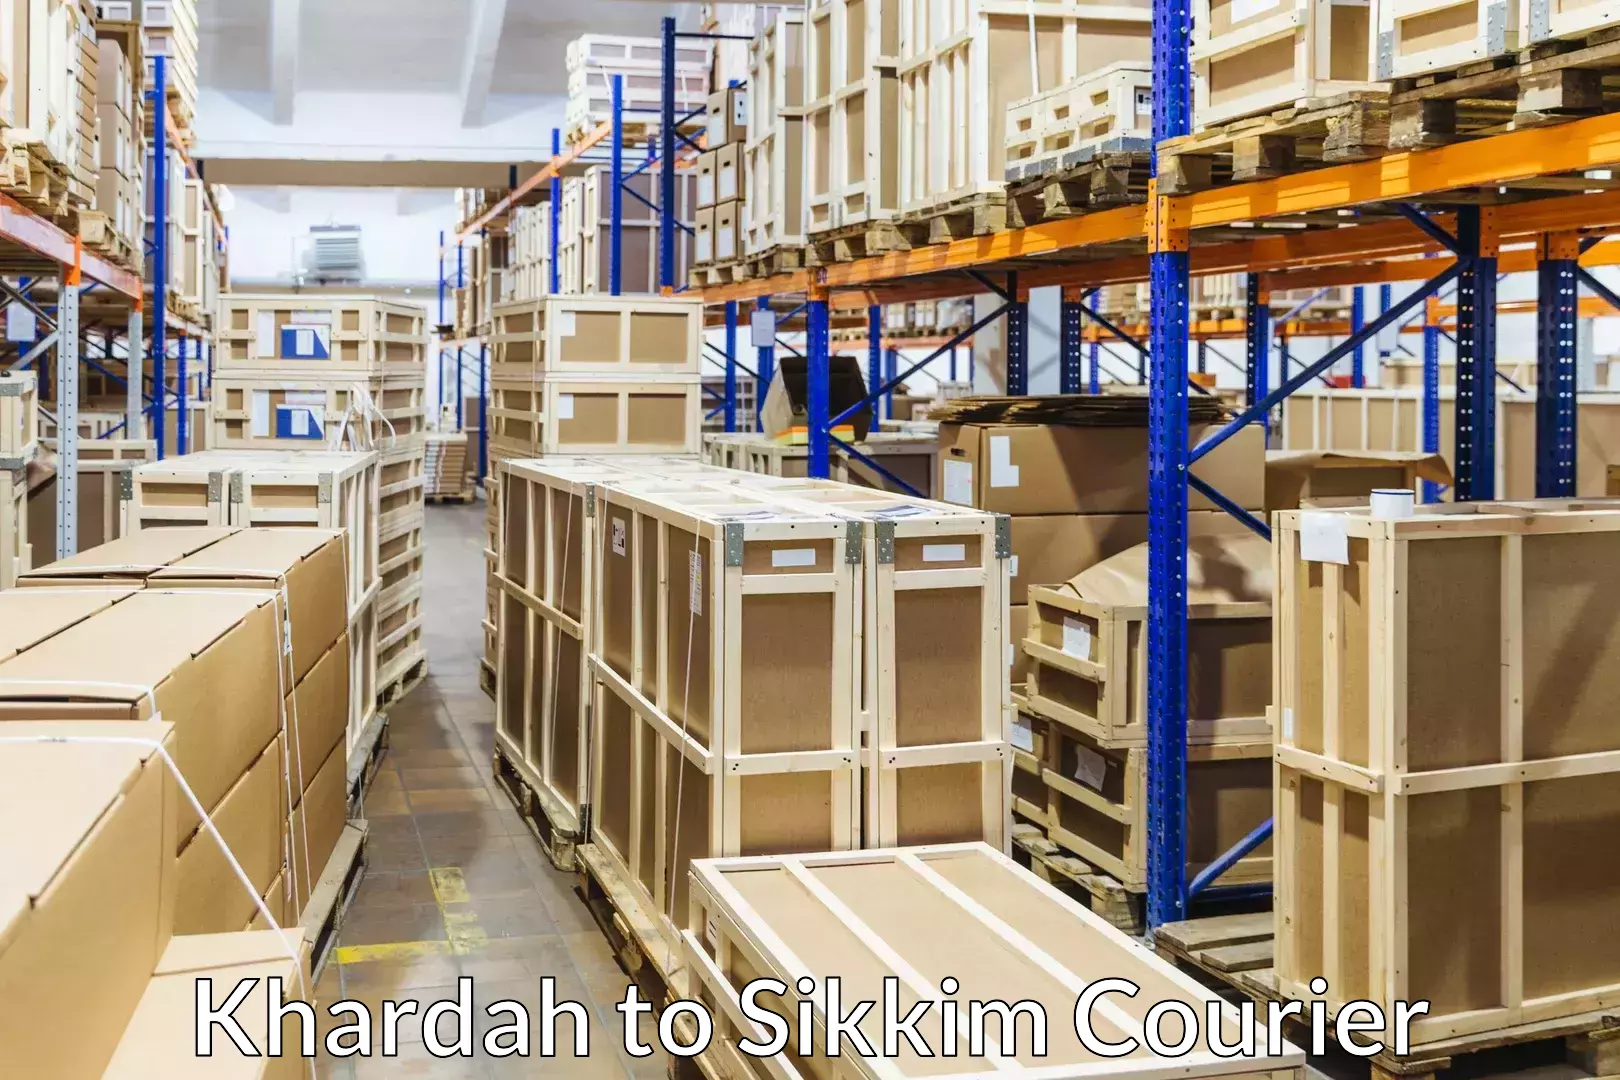 Moving and handling services Khardah to Pelling